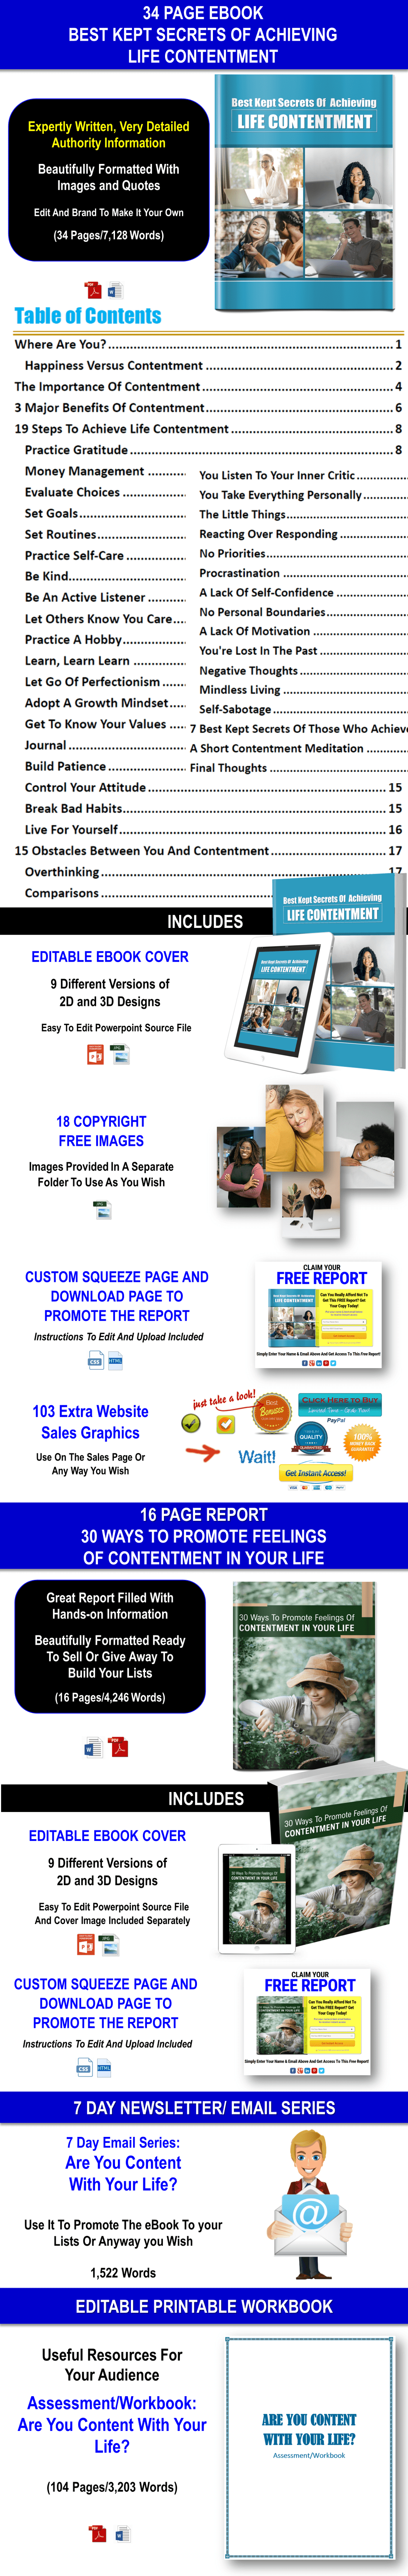 The Road To Life Contentment Content Pack with PLR Rights